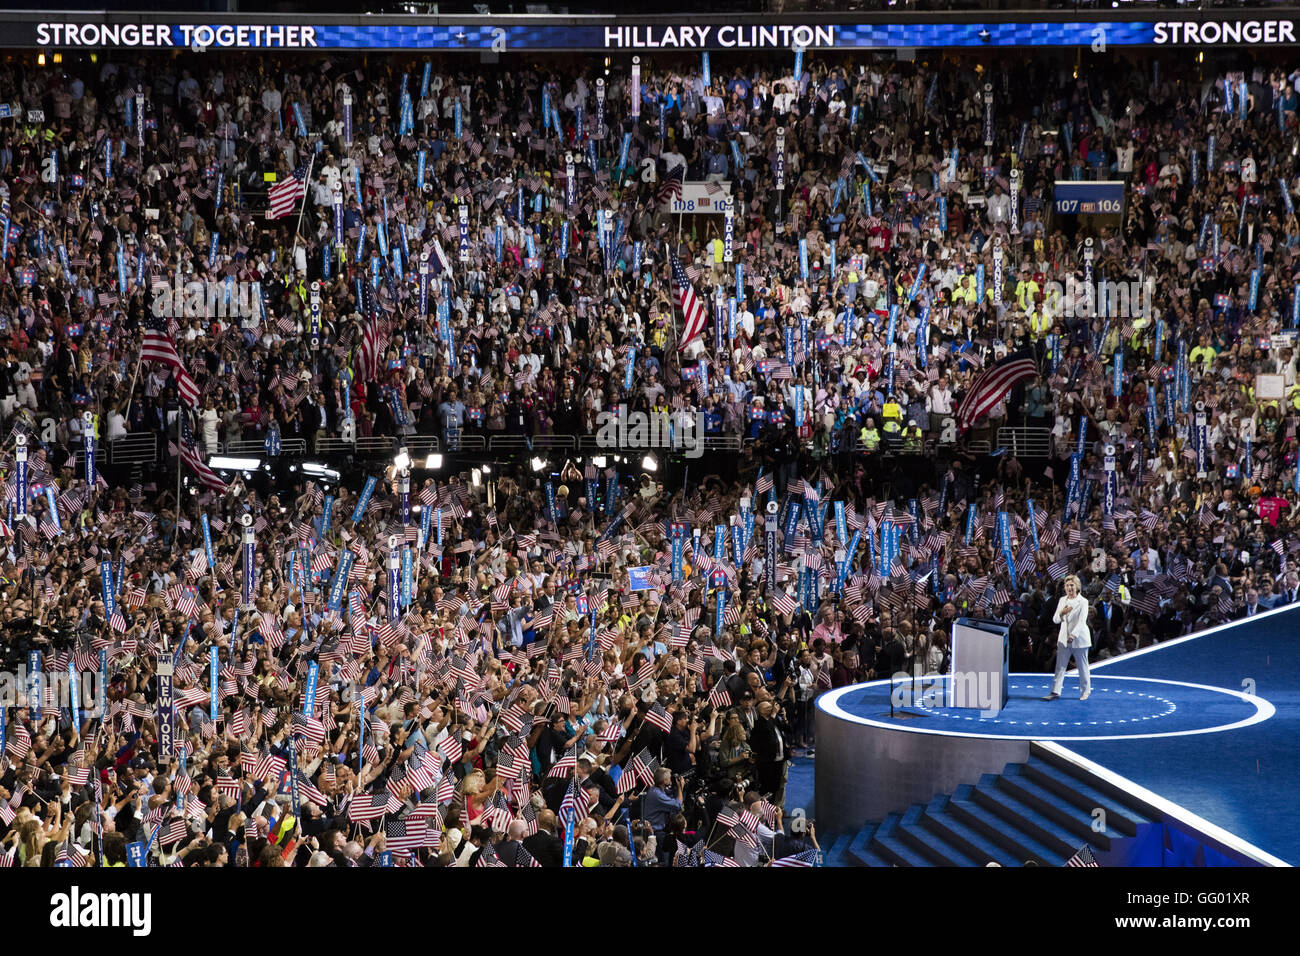 Philadelphia, Pennsylvania, USA. 28th July, 2016. U.S. Democratic Presidential Candidate Hillary Clinton takes the stage on the last day of the 2016 U.S. Democratic National Convention at Wells Fargo Center, Philadelphia, Pennsylvania, the United States on July 28, 2016. Former U.S. Secretary of State Hillary Clinton has formally accepted the U.S. Democratic Party's nomination for president and pledged more economic opportunities for Americans and "steady leadership ". © Li Muzi/Xinhua/Alamy Live News Stock Photo